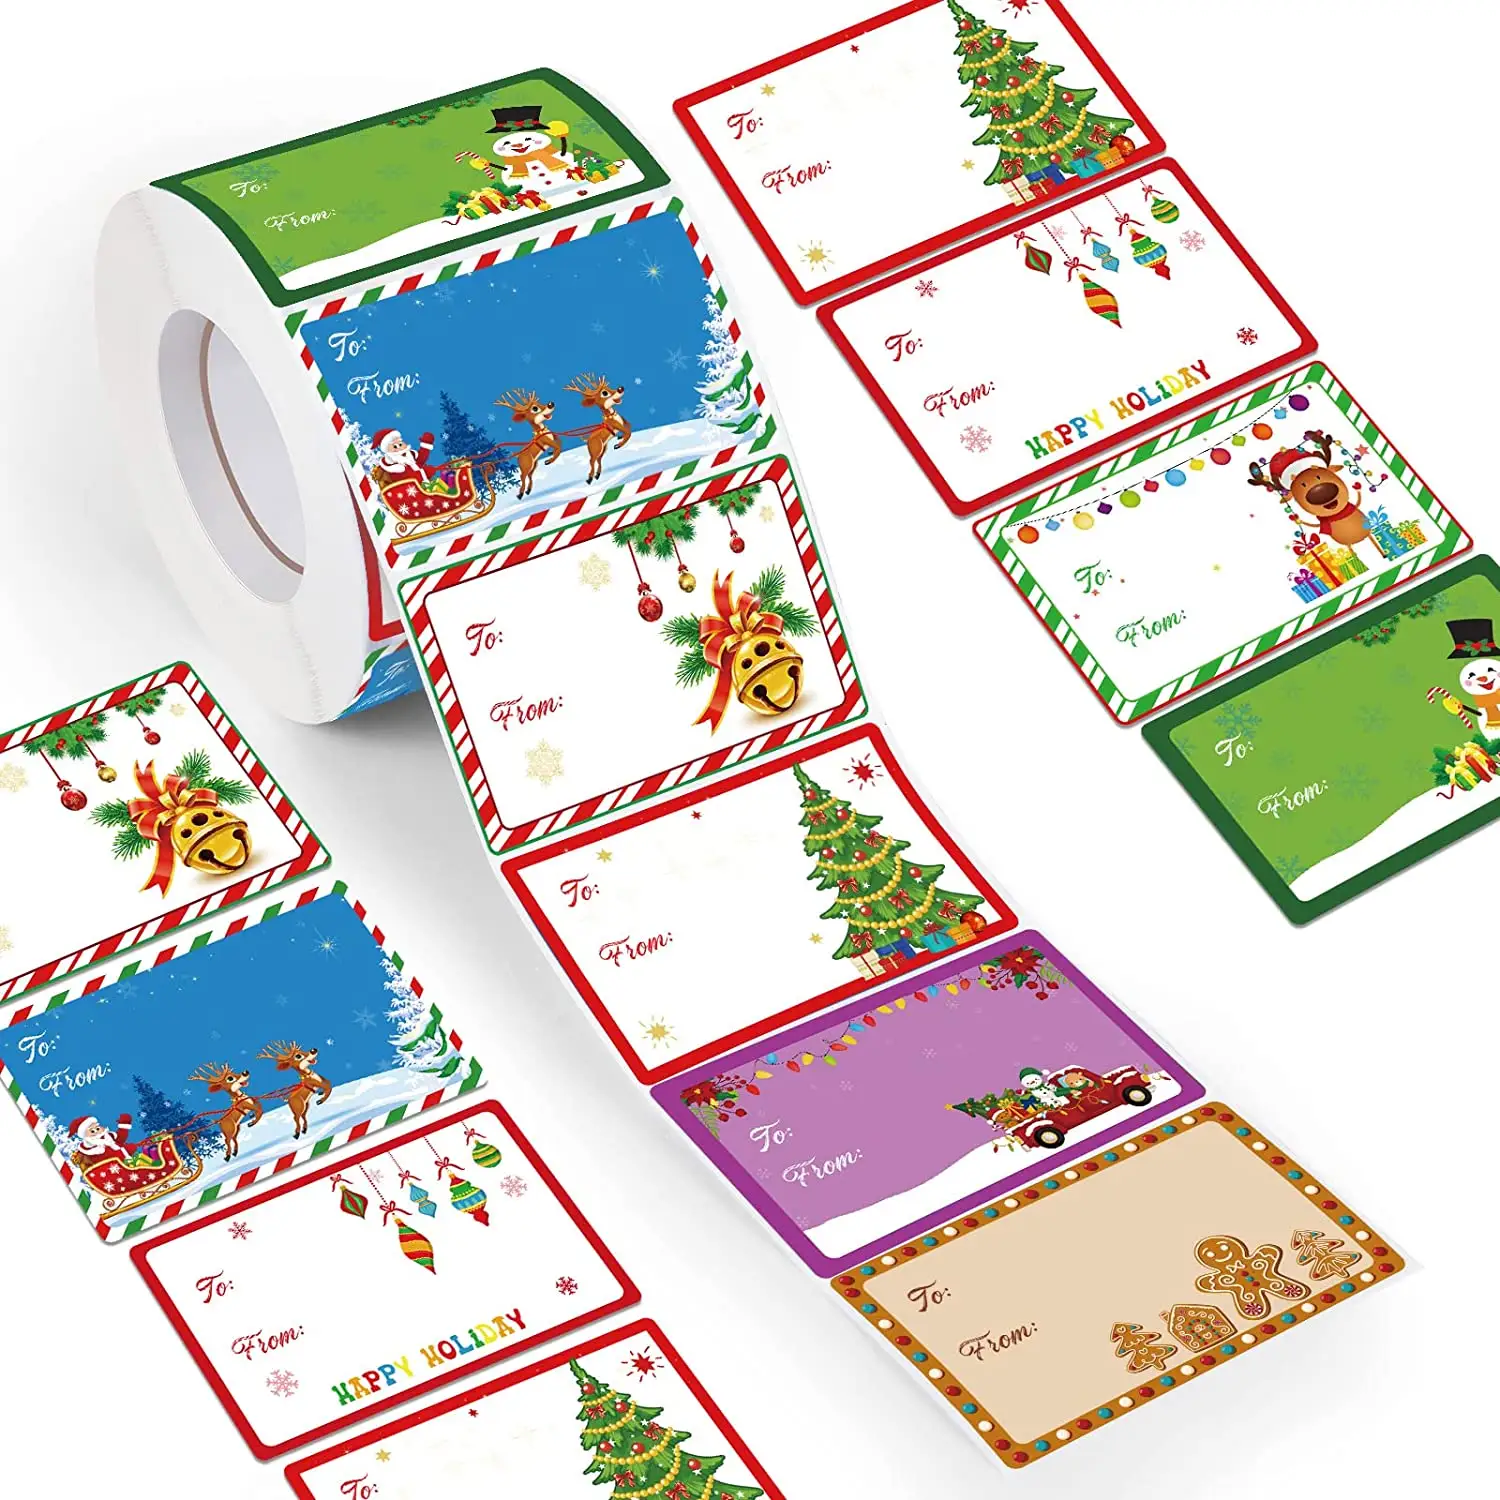 Amazon Hot Sell Custom Etiquette Self-Adhesive Label Roll Gift Decorative Merry Christmas Tree Sticker